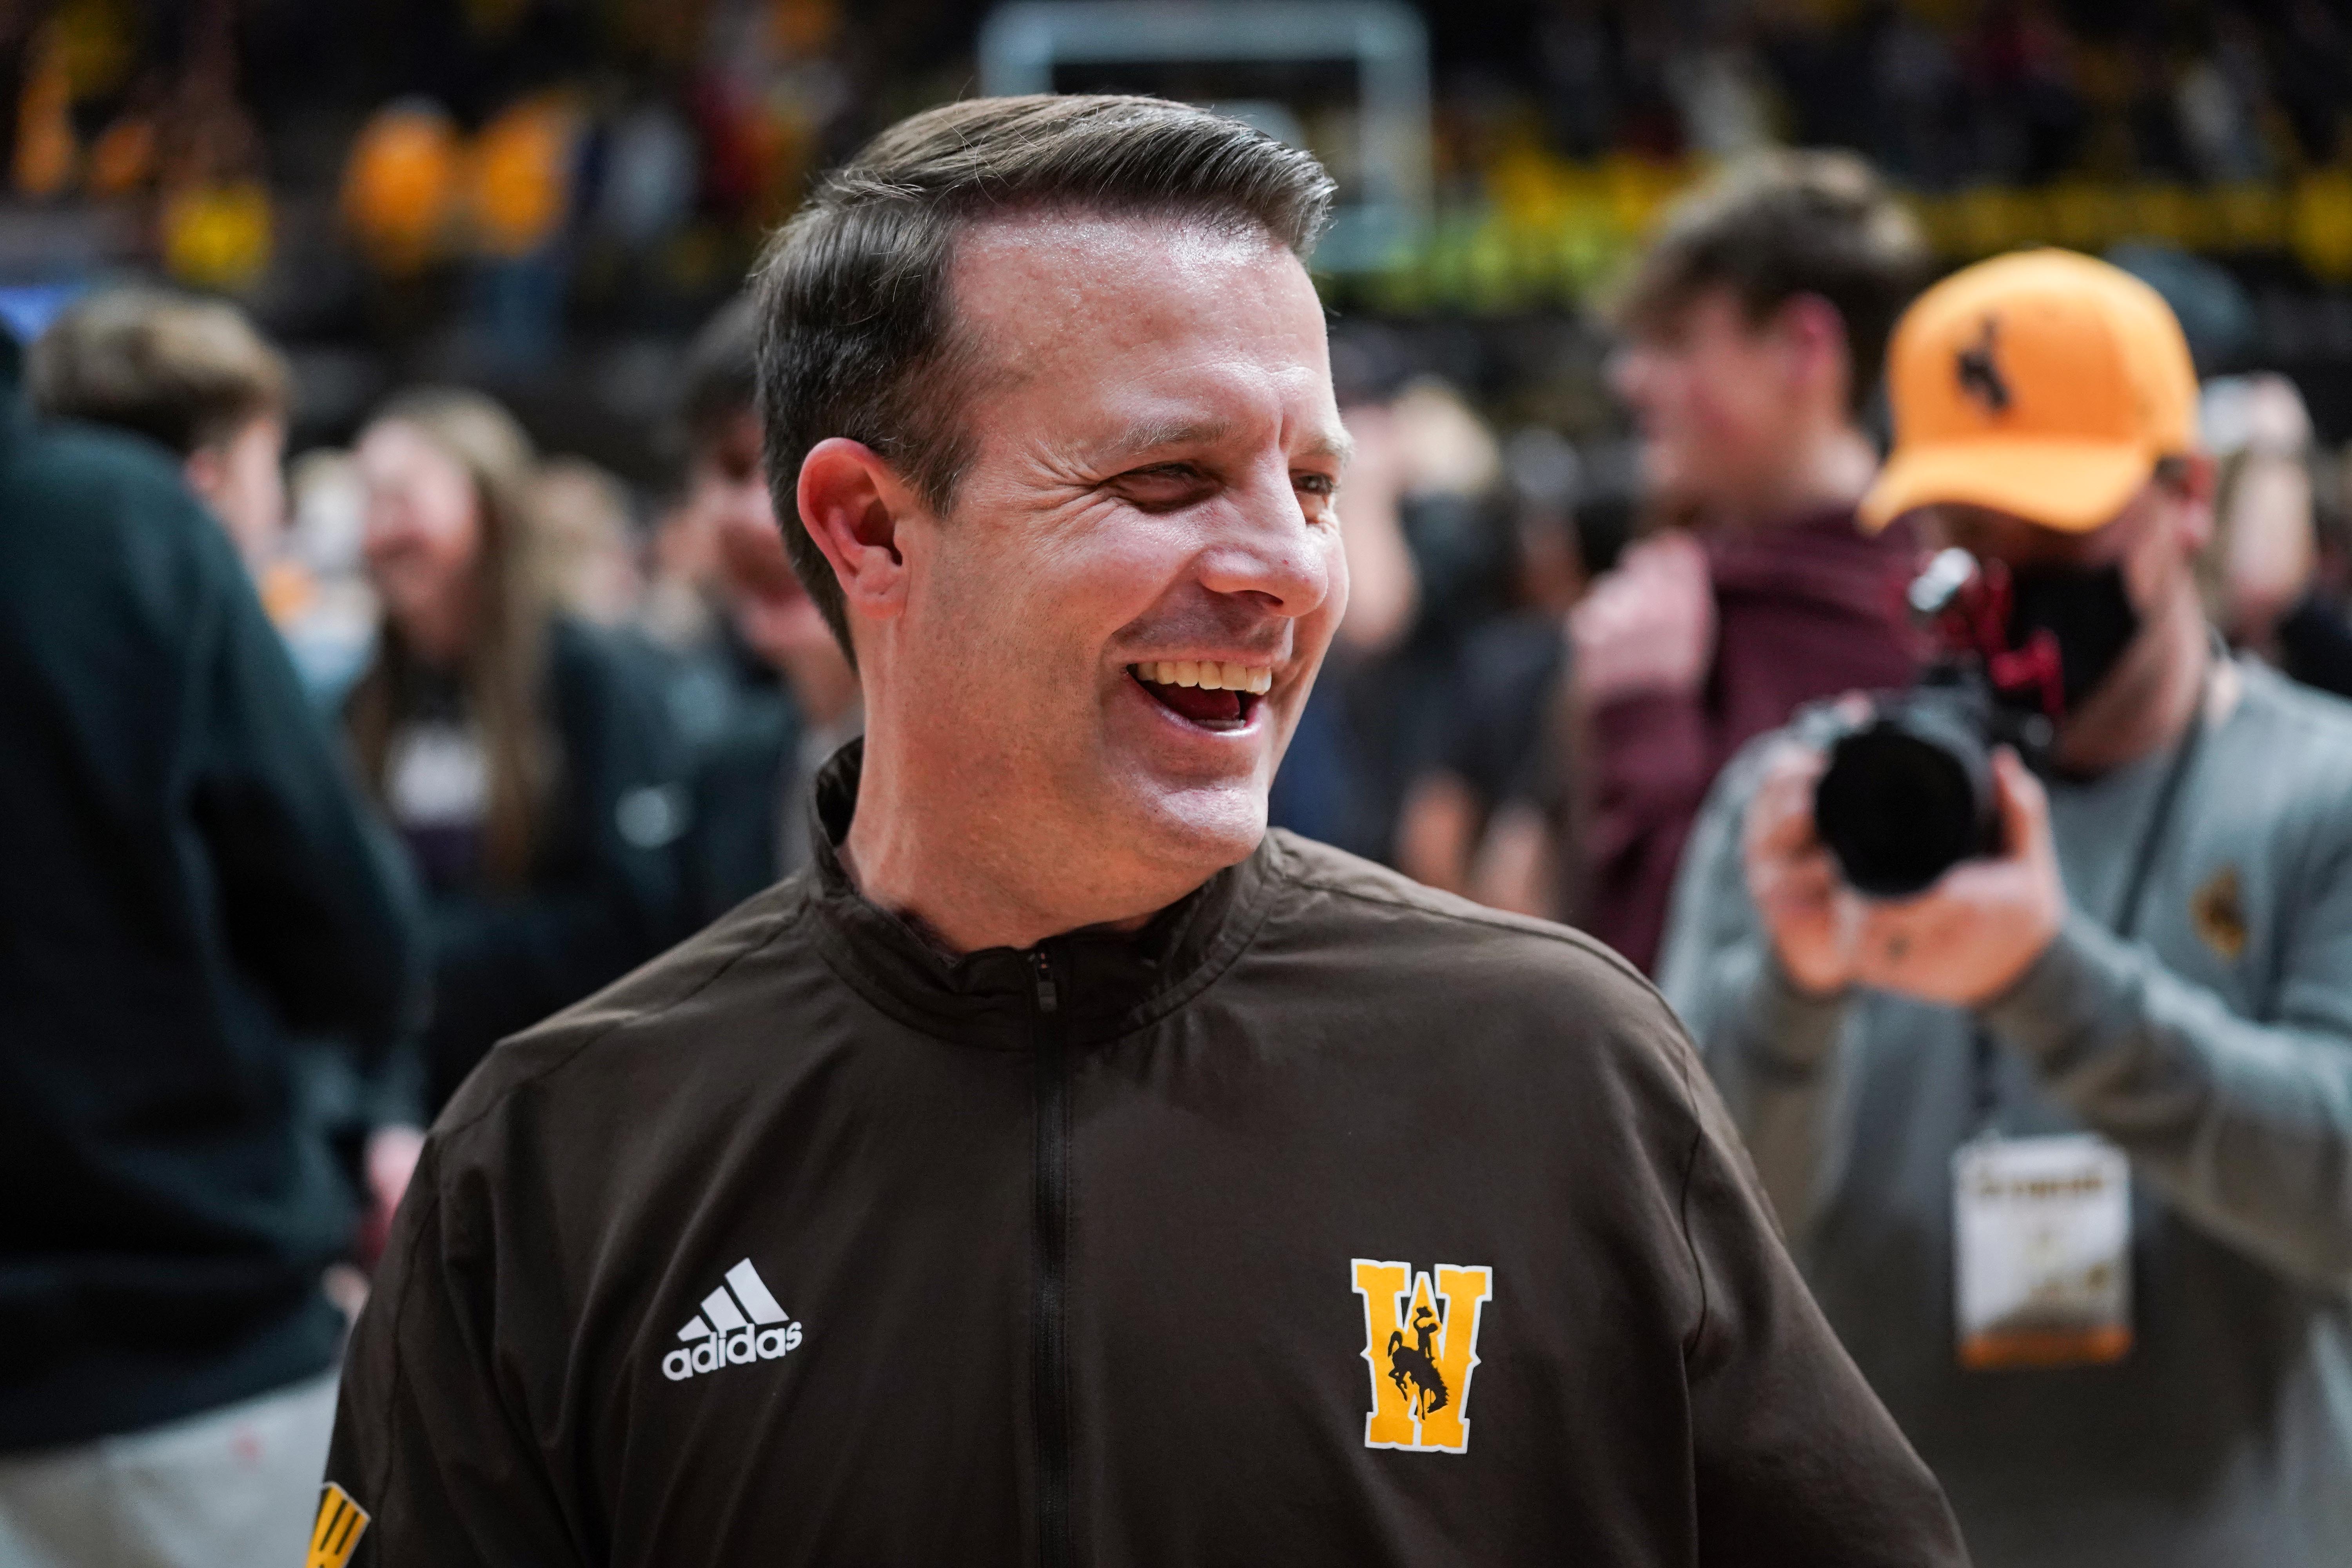 NCAA Basketball: Boise State at Wyoming